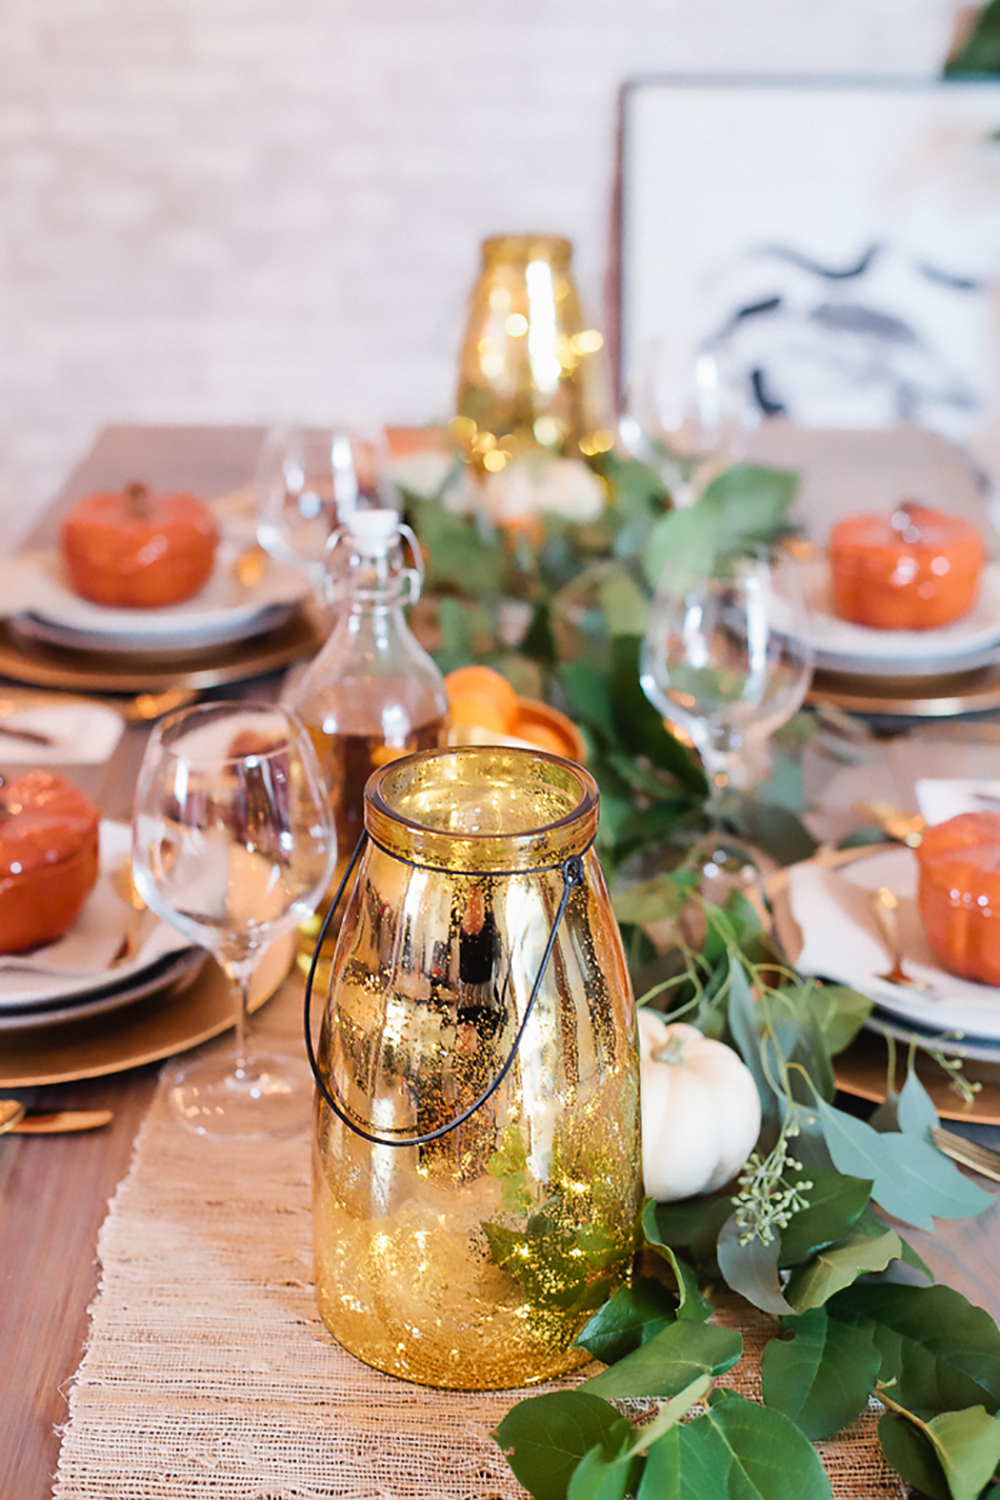 Play with adding different kinds of light to your tablescape